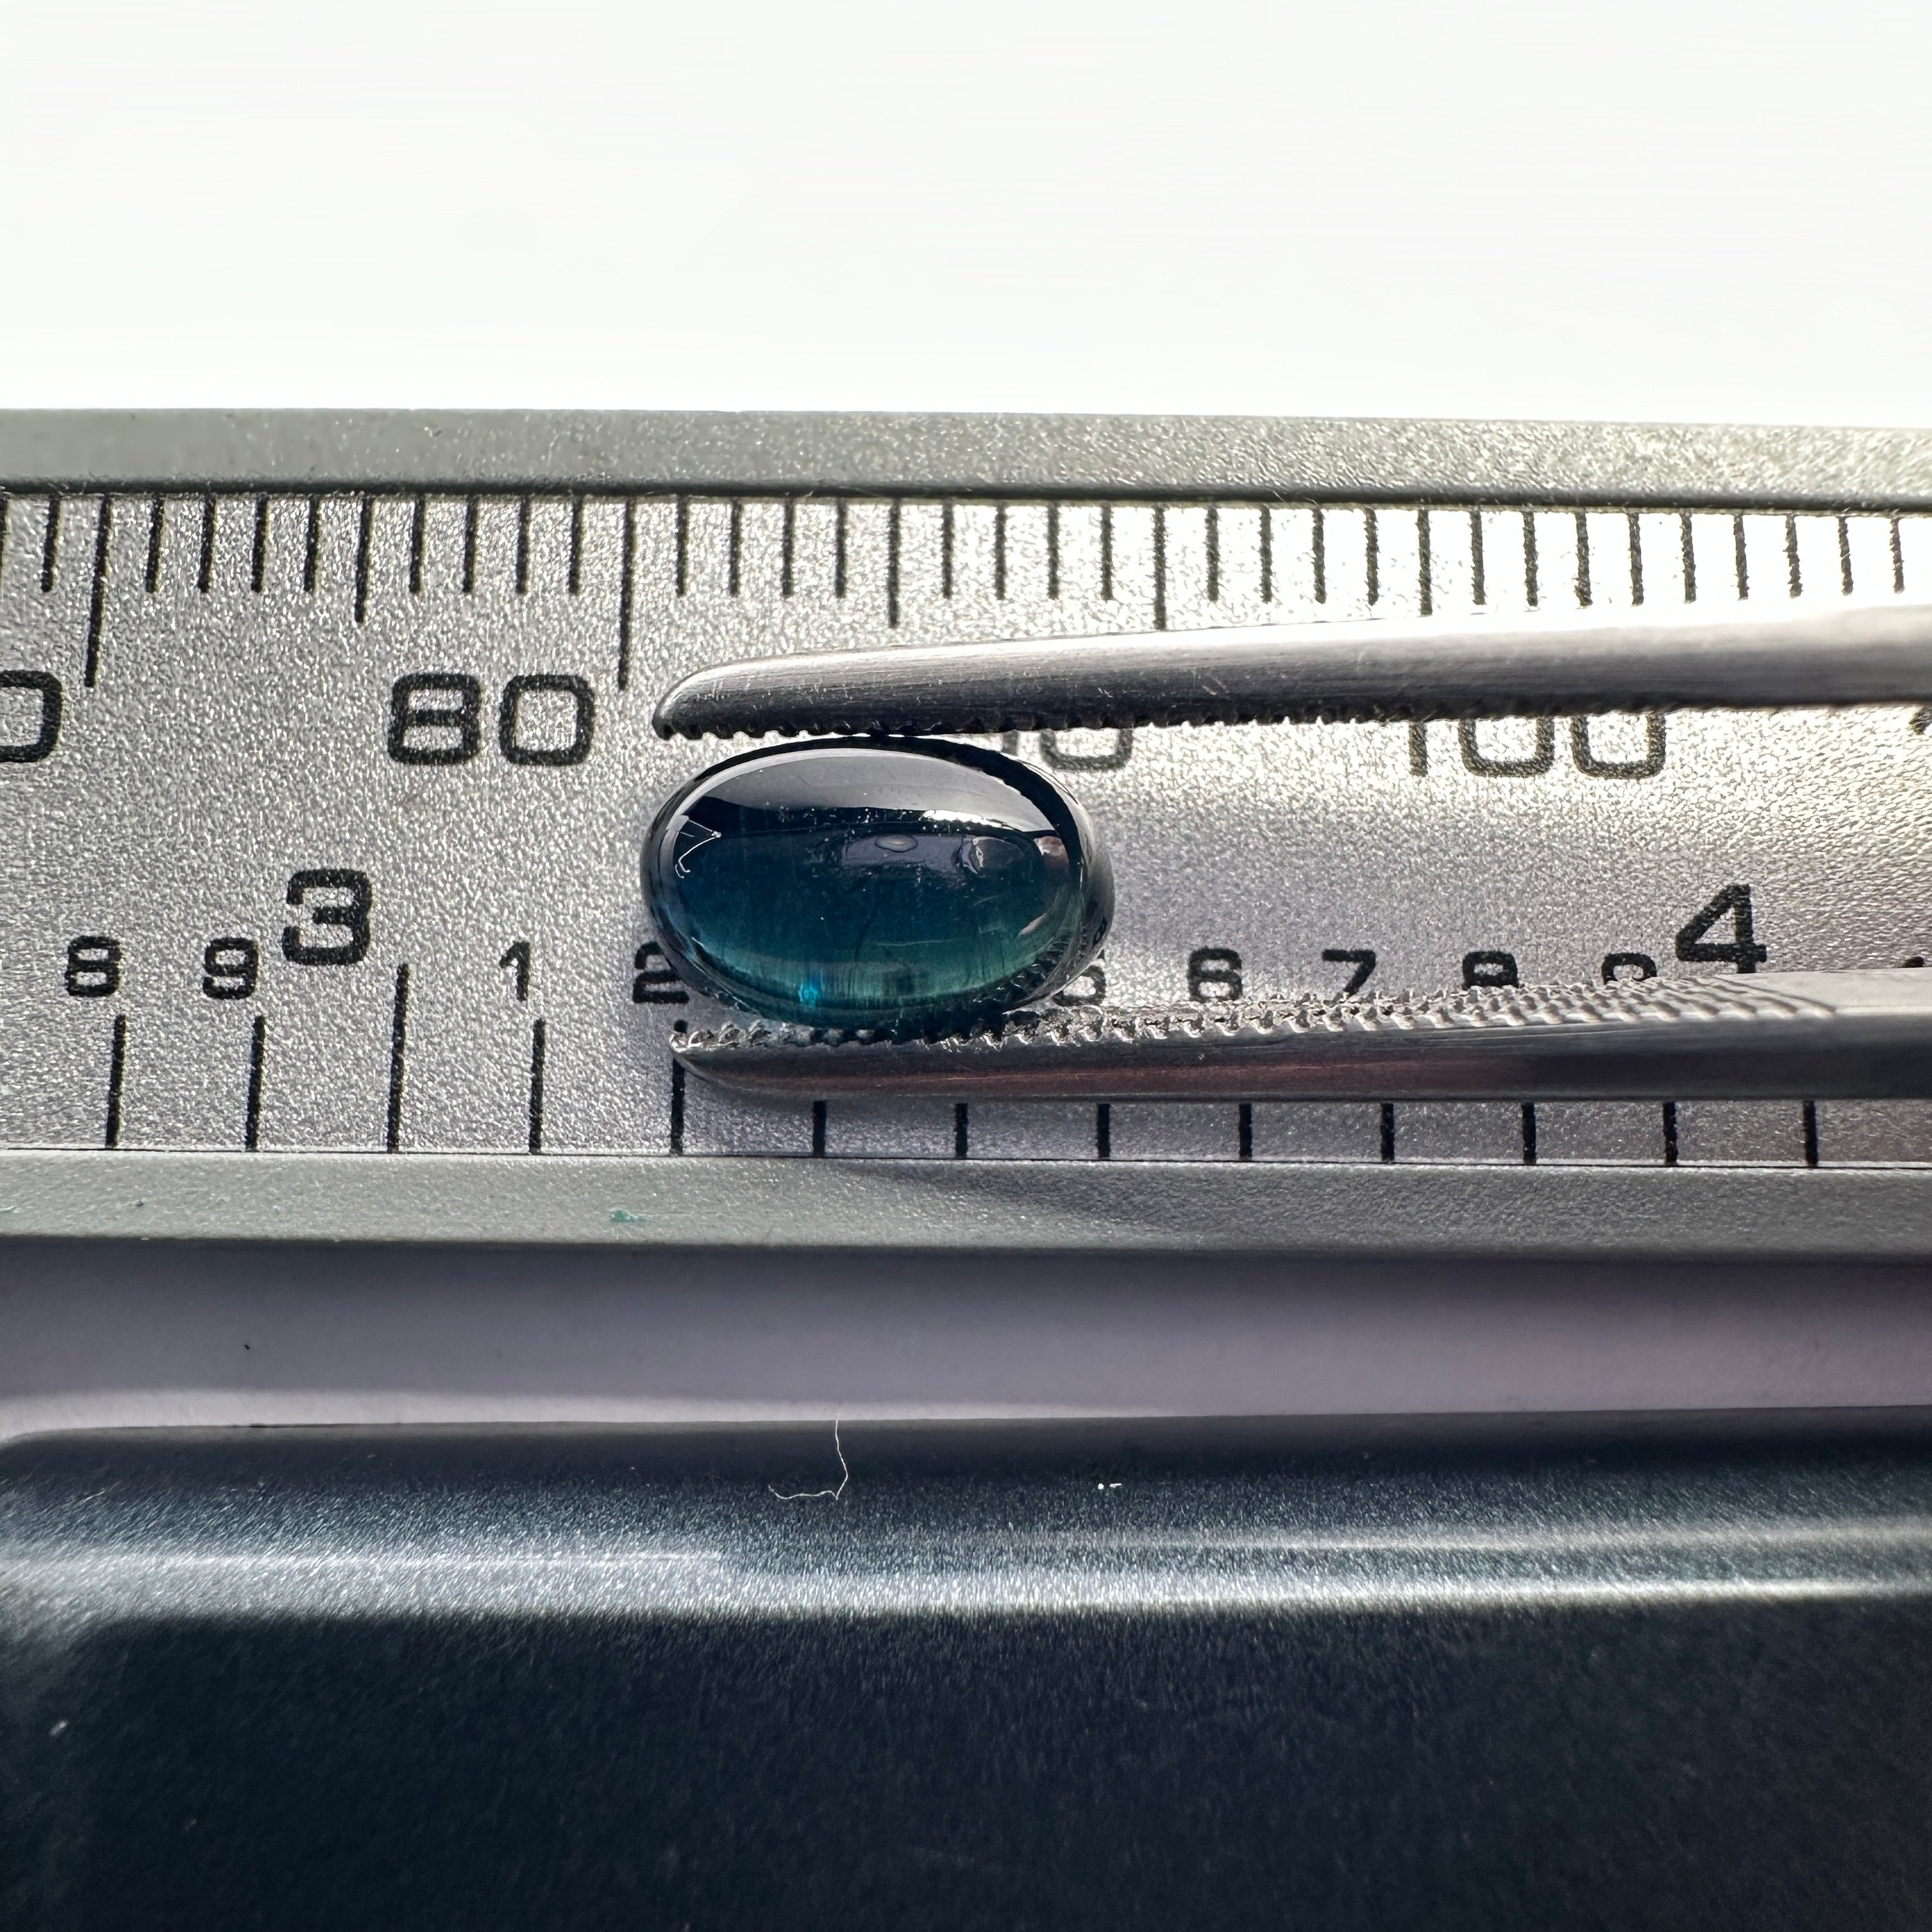 1.80Ct Sapphire Cabochon Kenya. Untreated Unheated. Can Be Used As Is Or Facet It Into A Cut Stone.